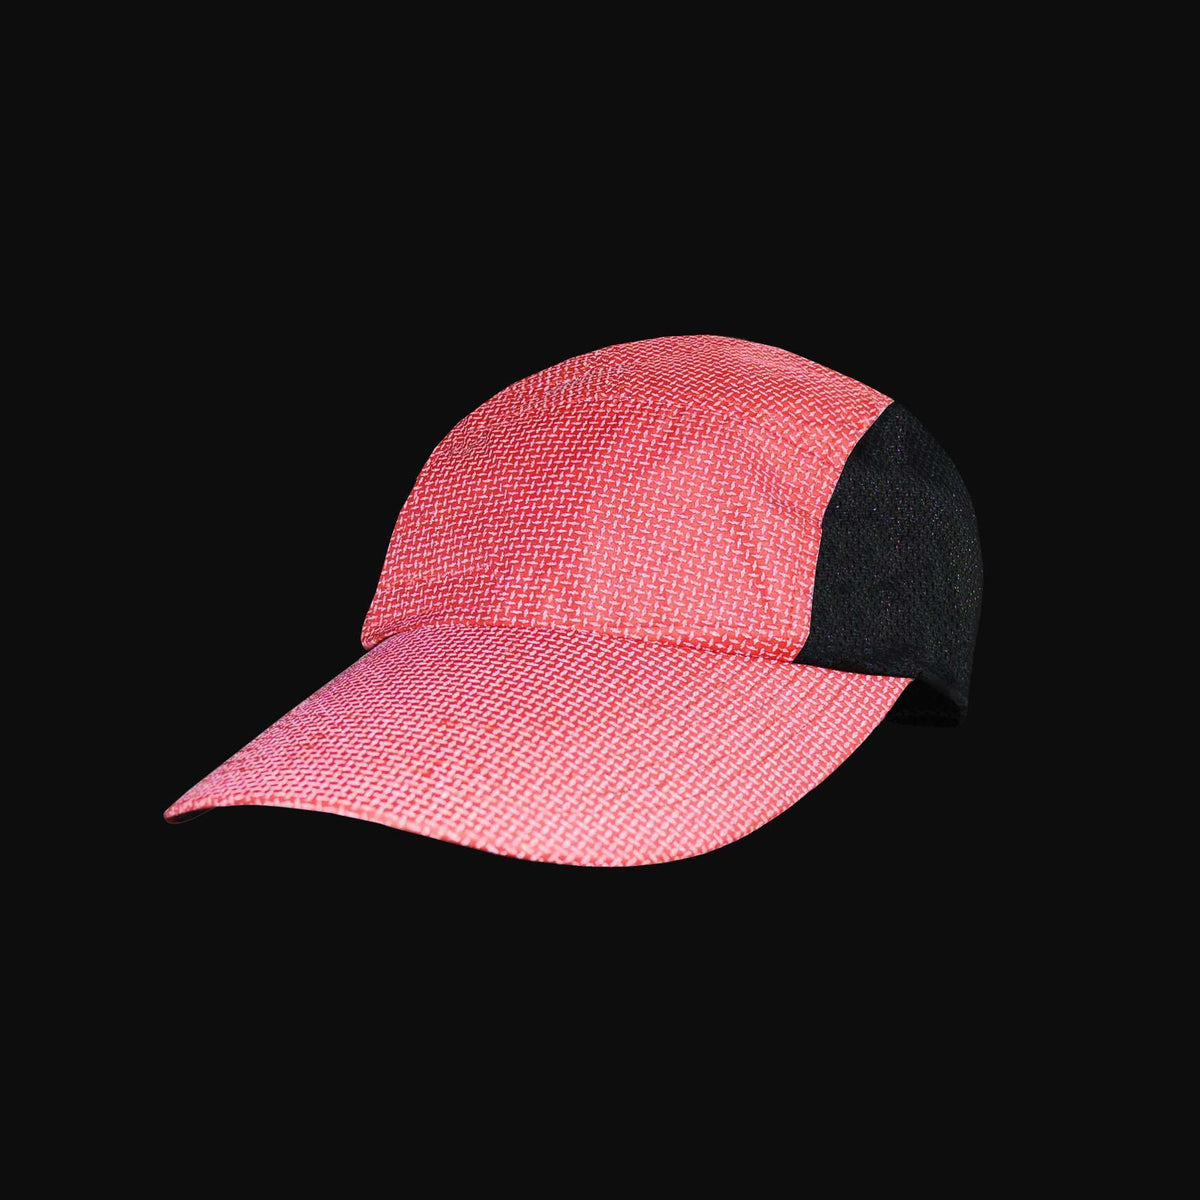 Primo Lid Mesh-Sided Baseball Cap in Reflective Cranberry